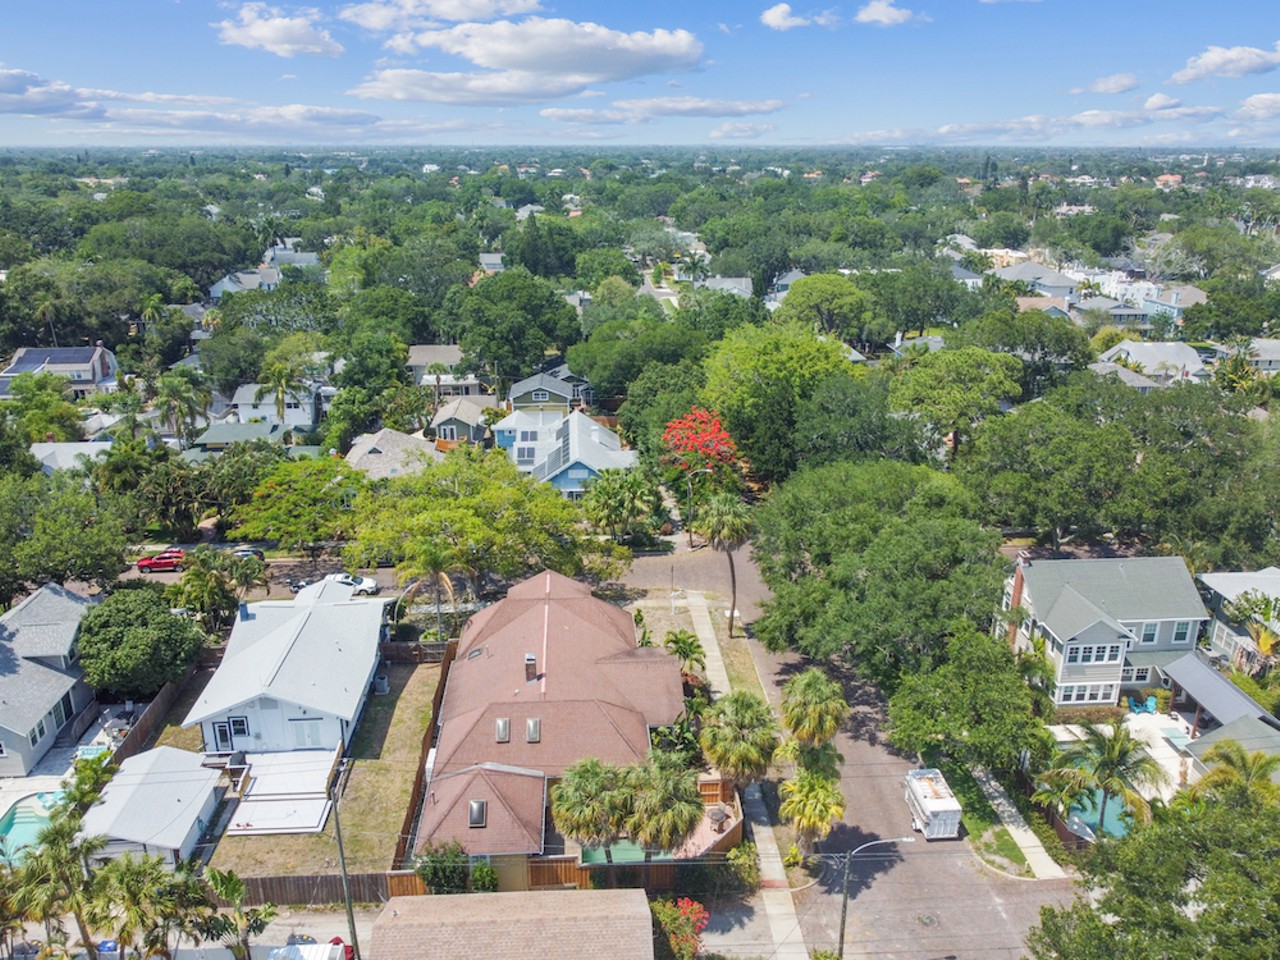 The former St. Pete home of 'Shutter Island' and 'Mystic River' author Dennis Lehane is now for sale